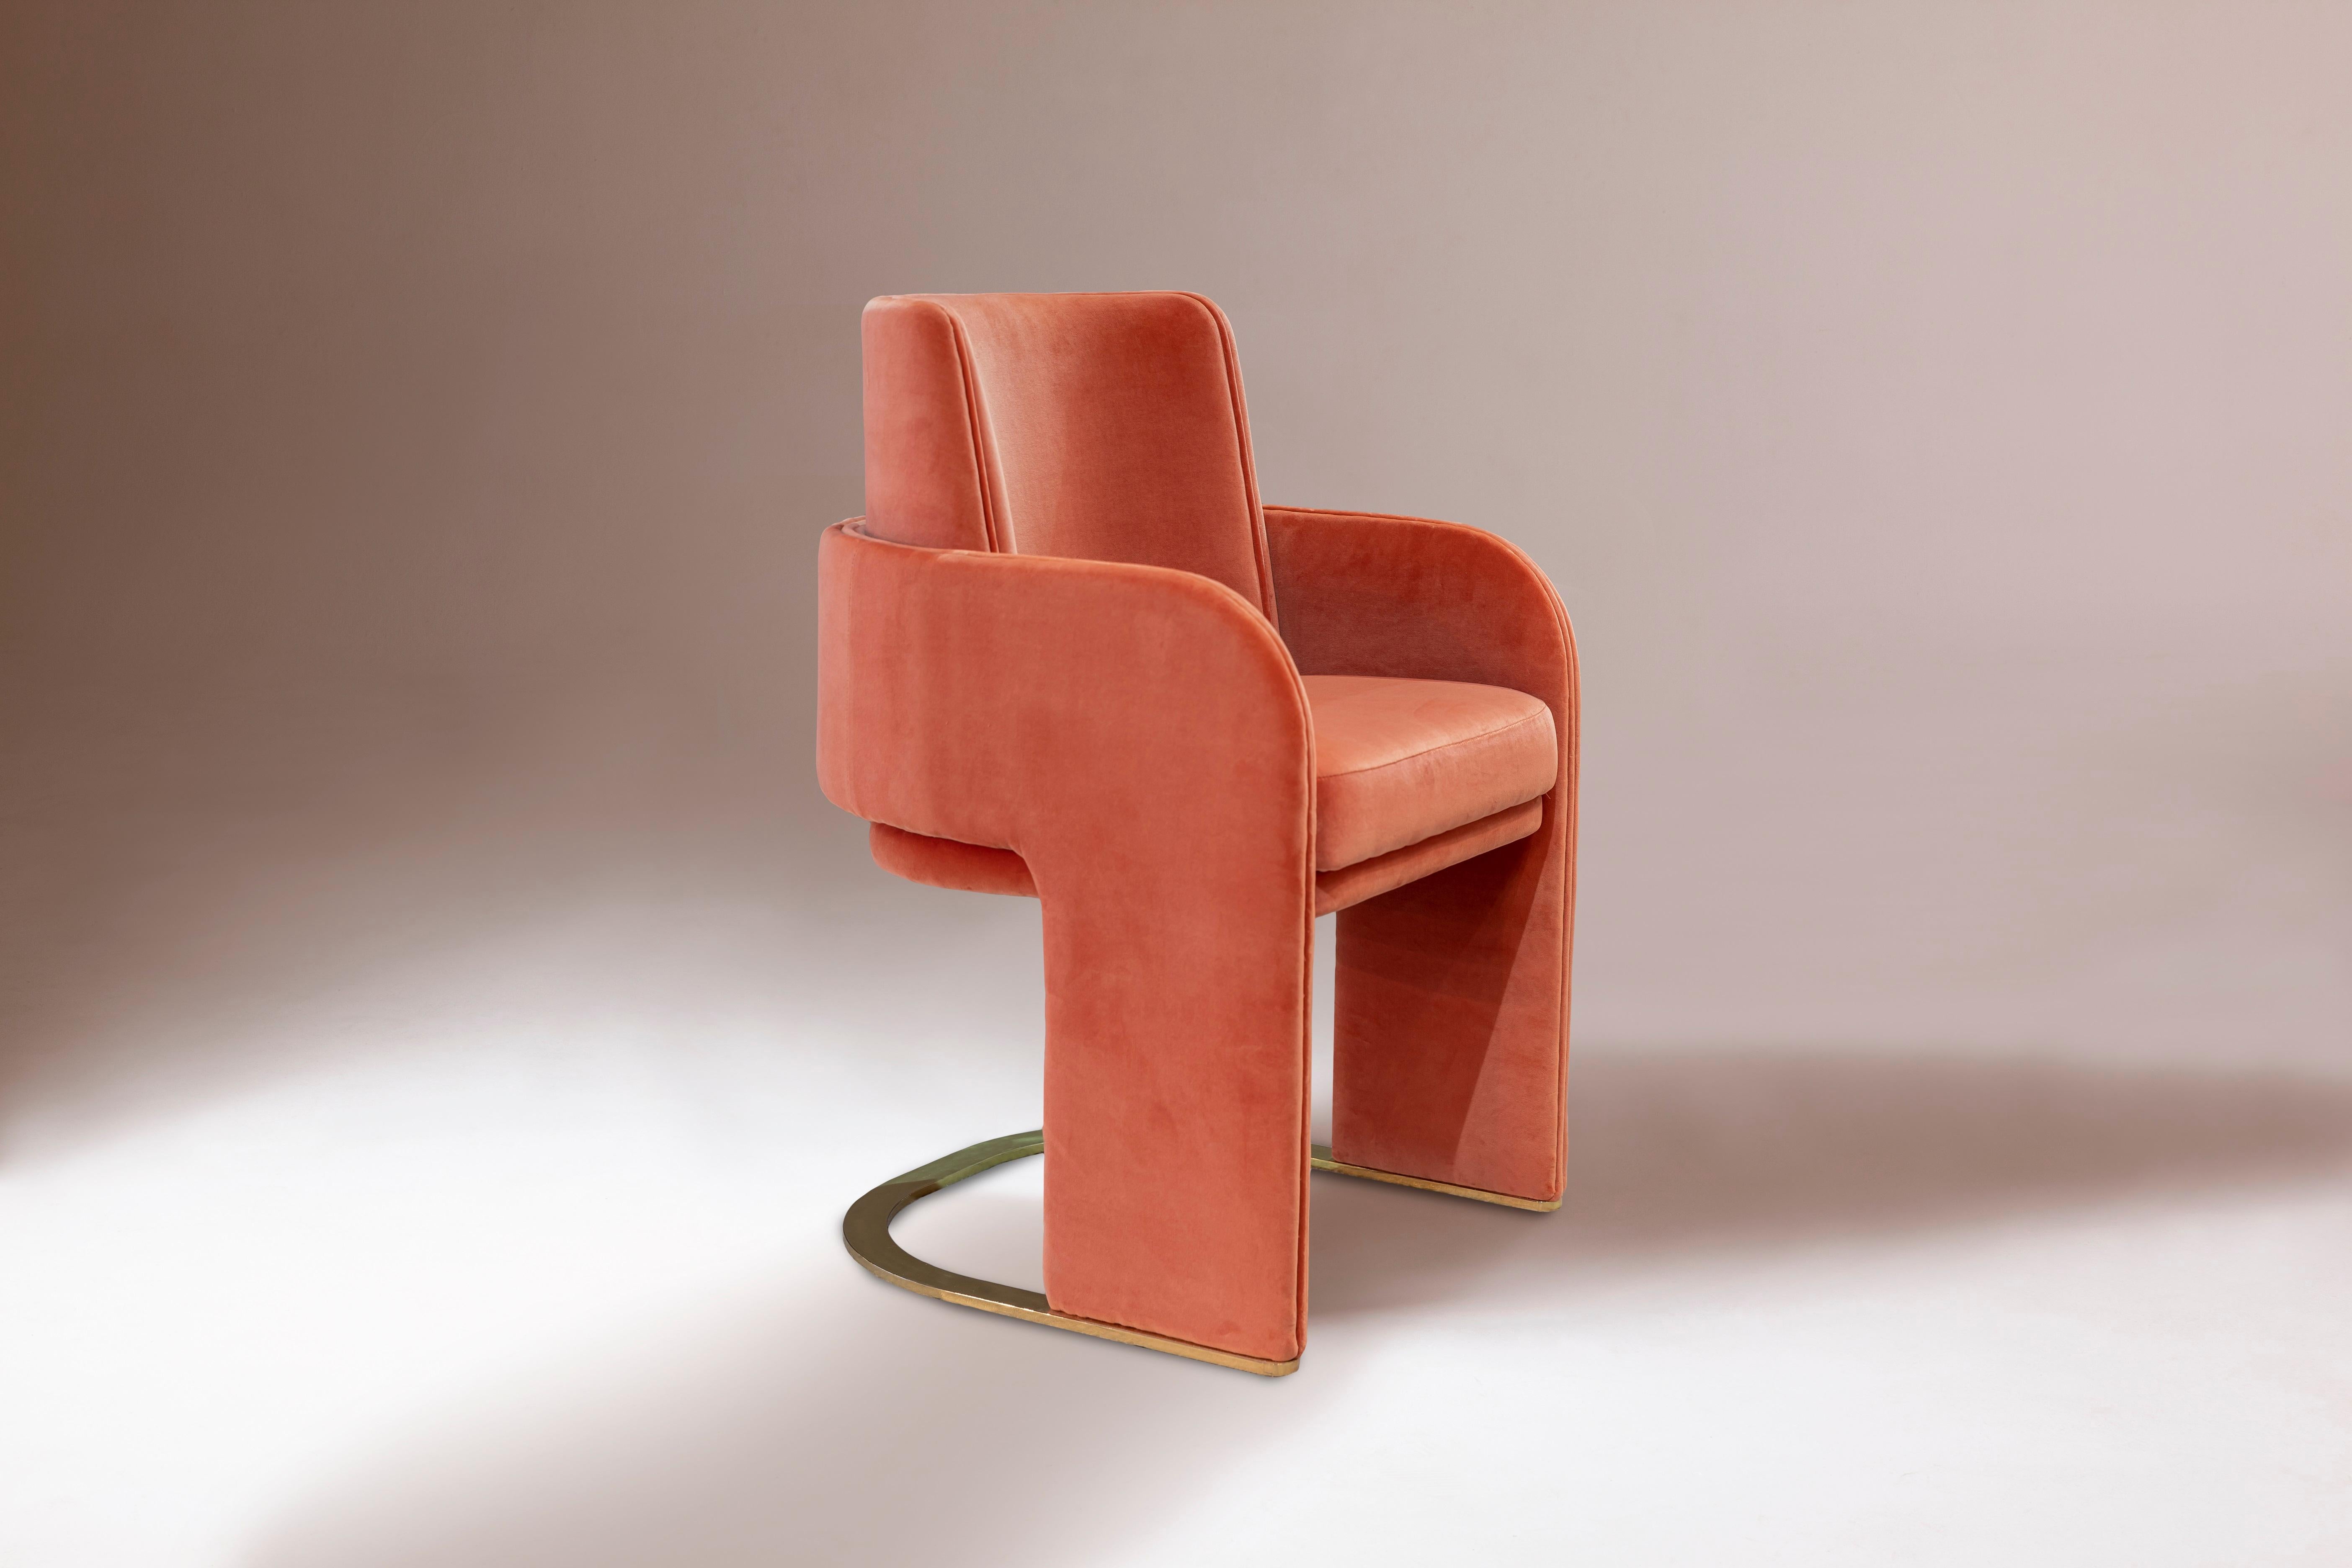 Odisseia bar chair by Dooq
Dimensions: W 56 x D 57 x H 85 cm
Materials: Leather or fabric, stainless steel plated polished or satin: brass, copper or nickel

Odisseia chair embodies the aesthetic spirit of the space age, a new kind of discreet